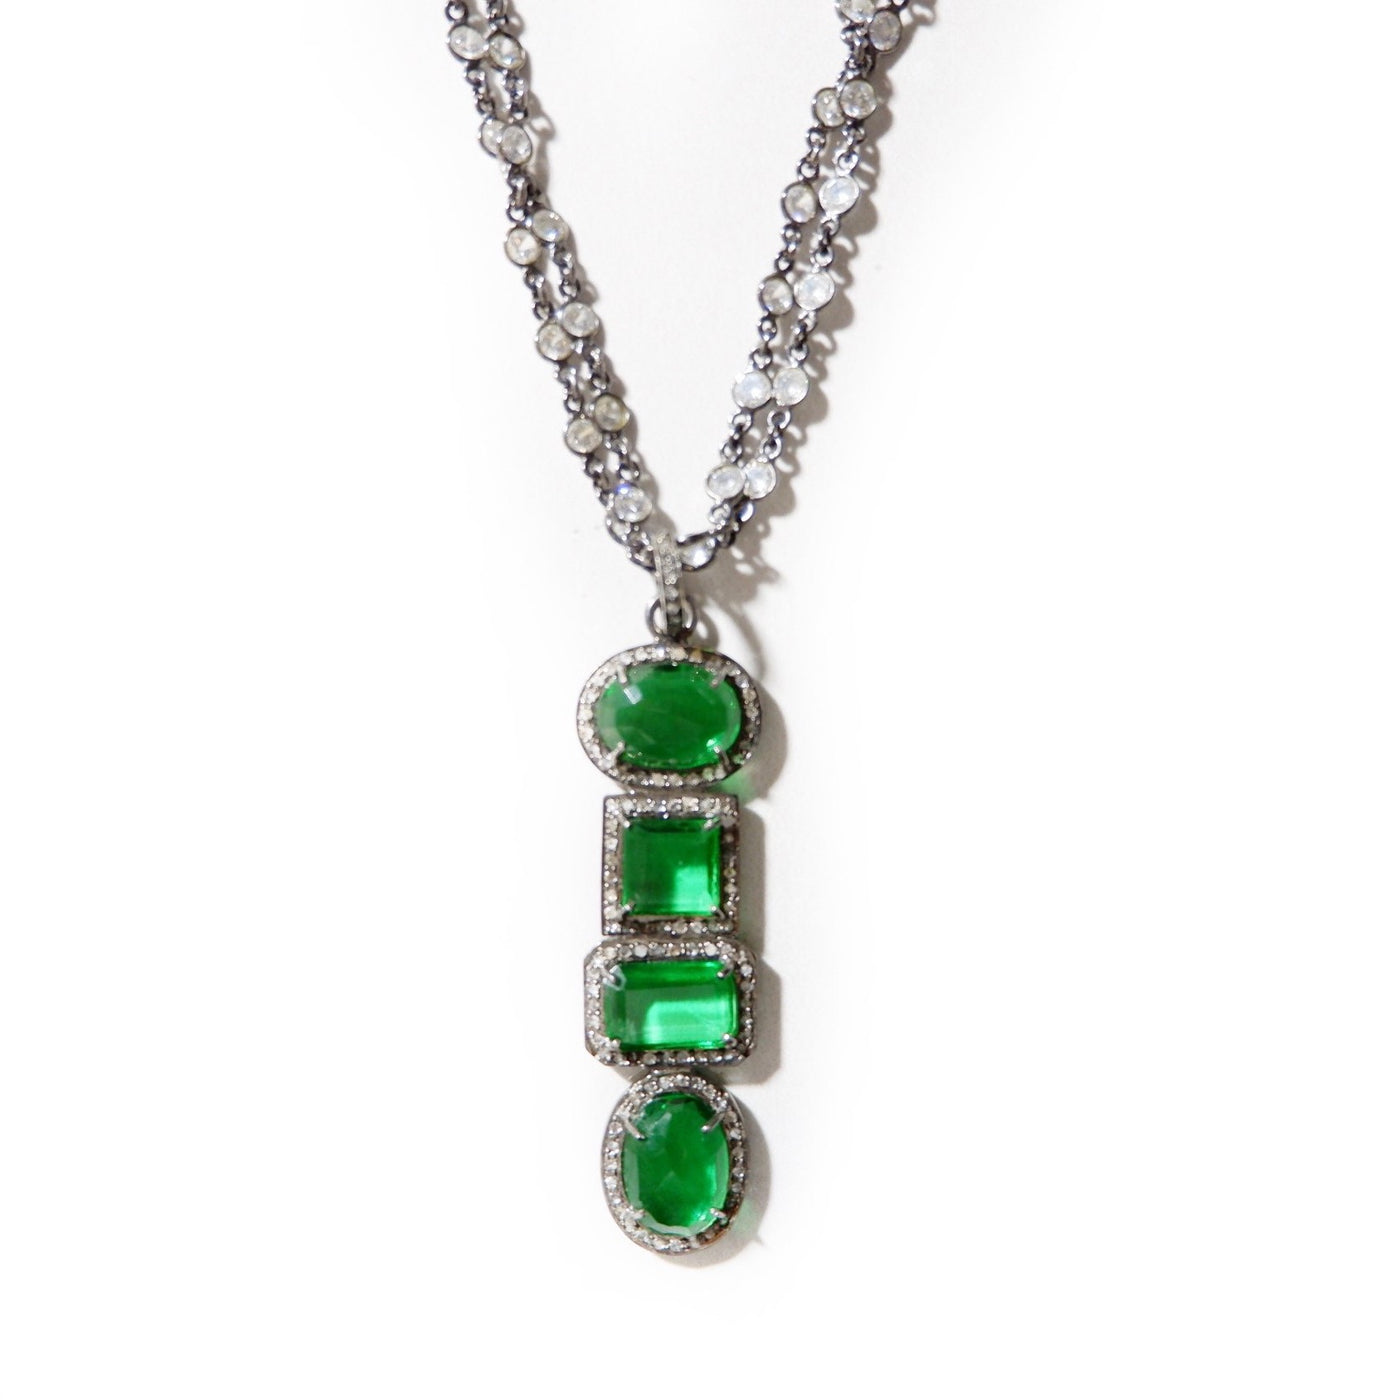 emerald green and diamonds drip necklace